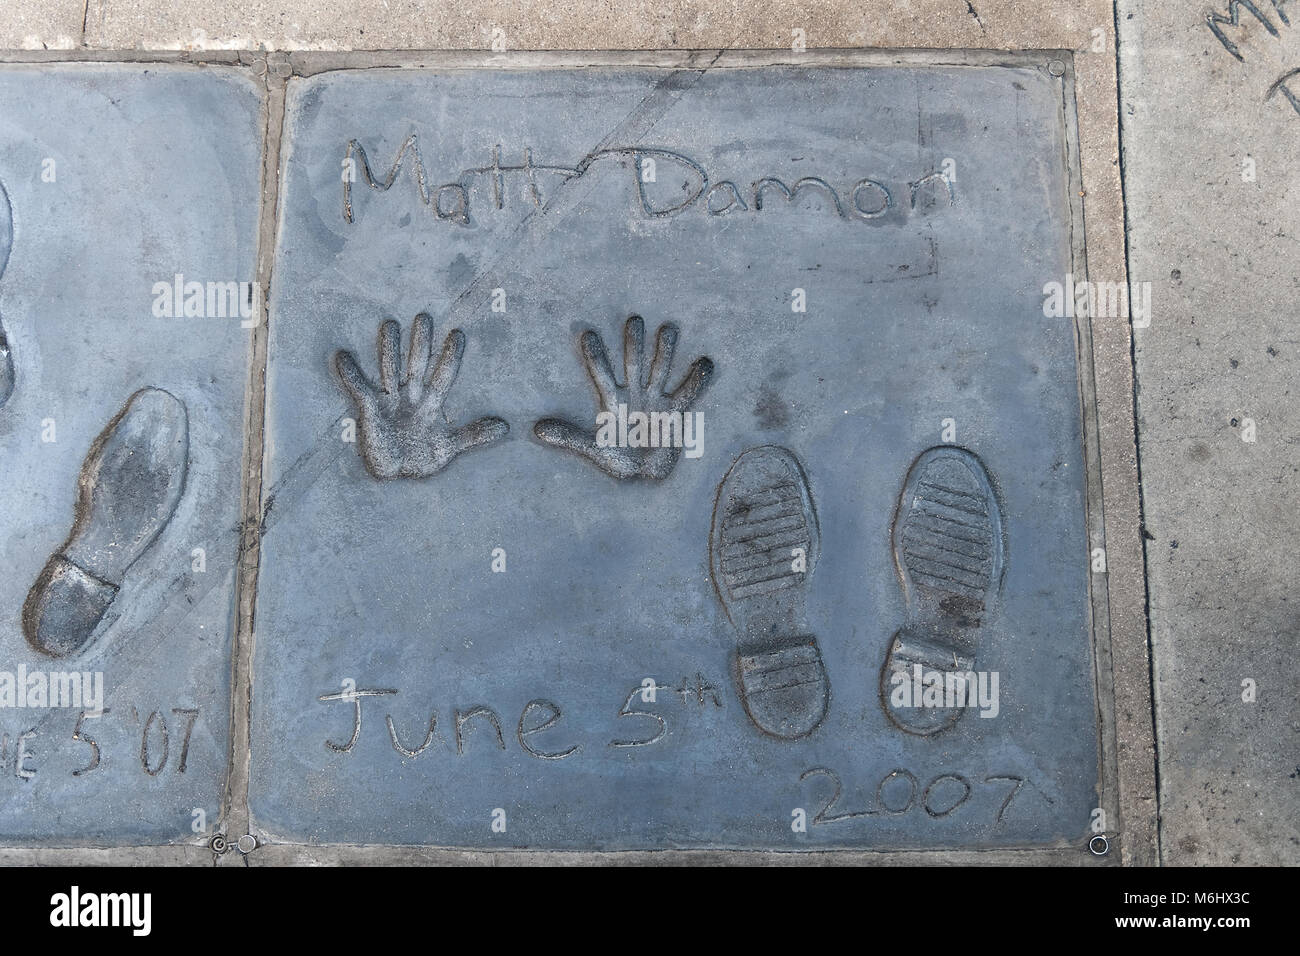 Handprints and footprints of the famous american actor Matt Damon on the ground behind the TCL Grauman's Chinese Theatre, Los Angeles, California. Stock Photo